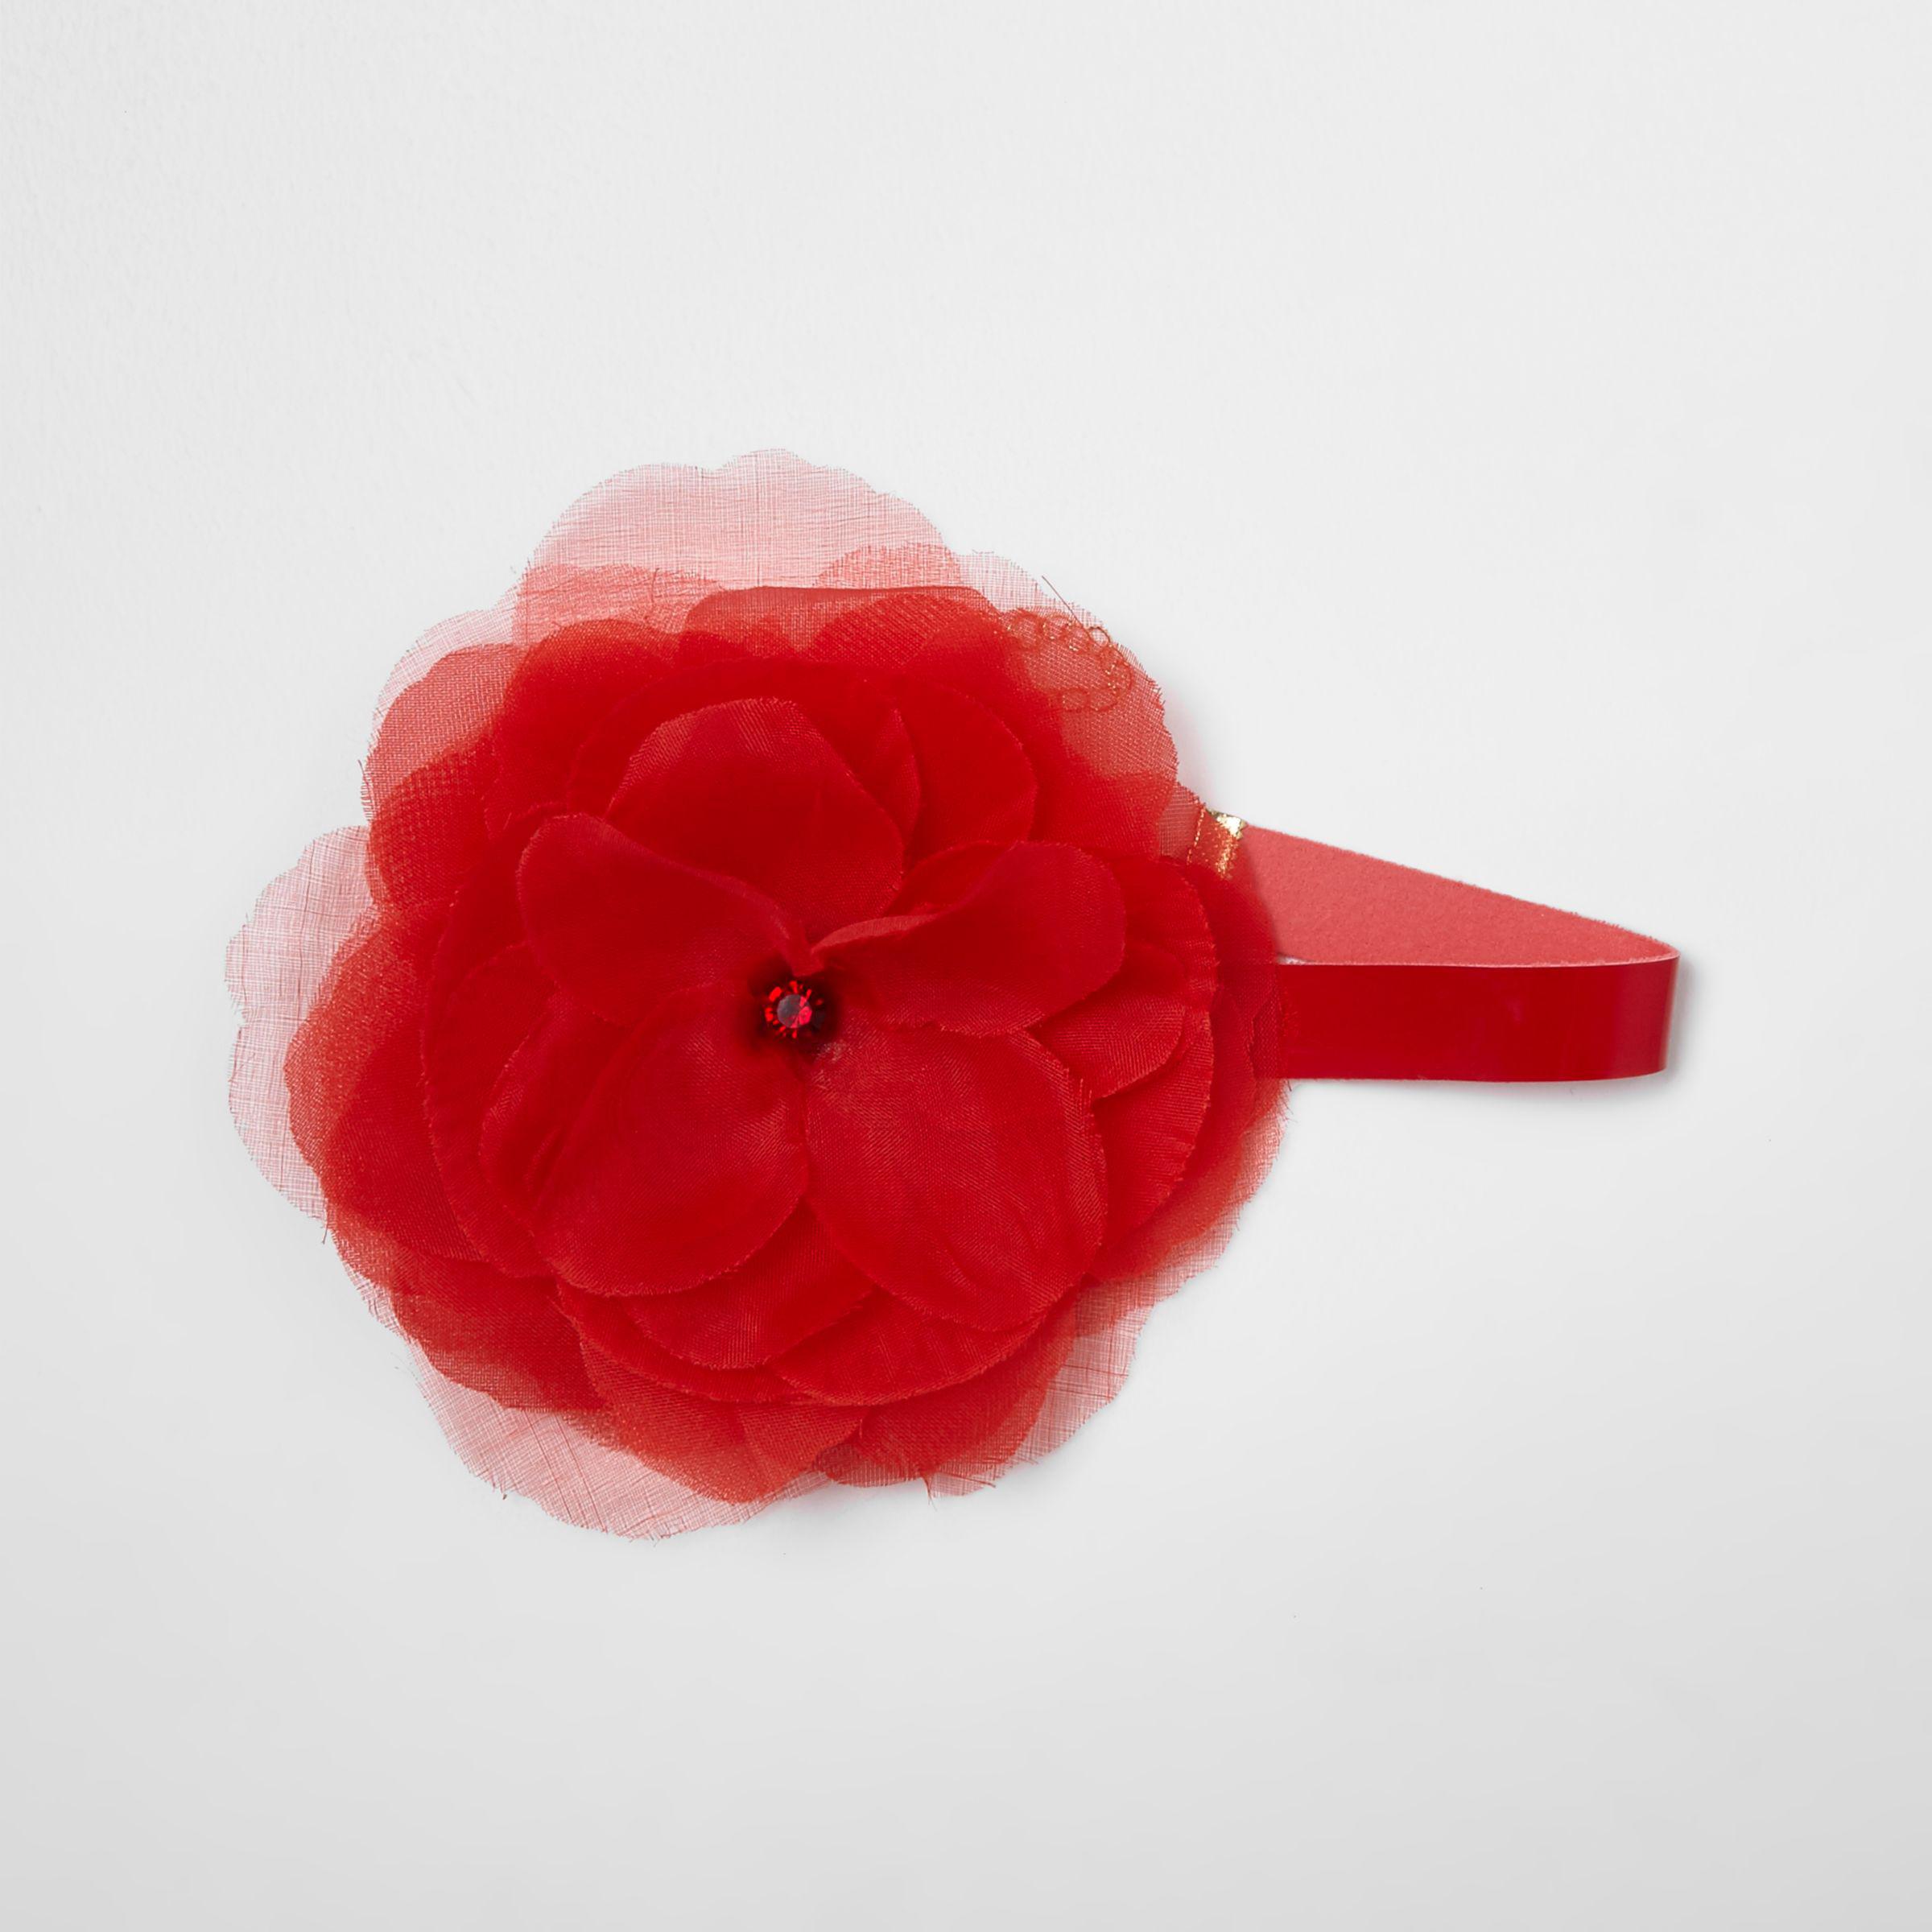 Handmade Phantom Flower Choker/Necklace Made Out of Organza in Red